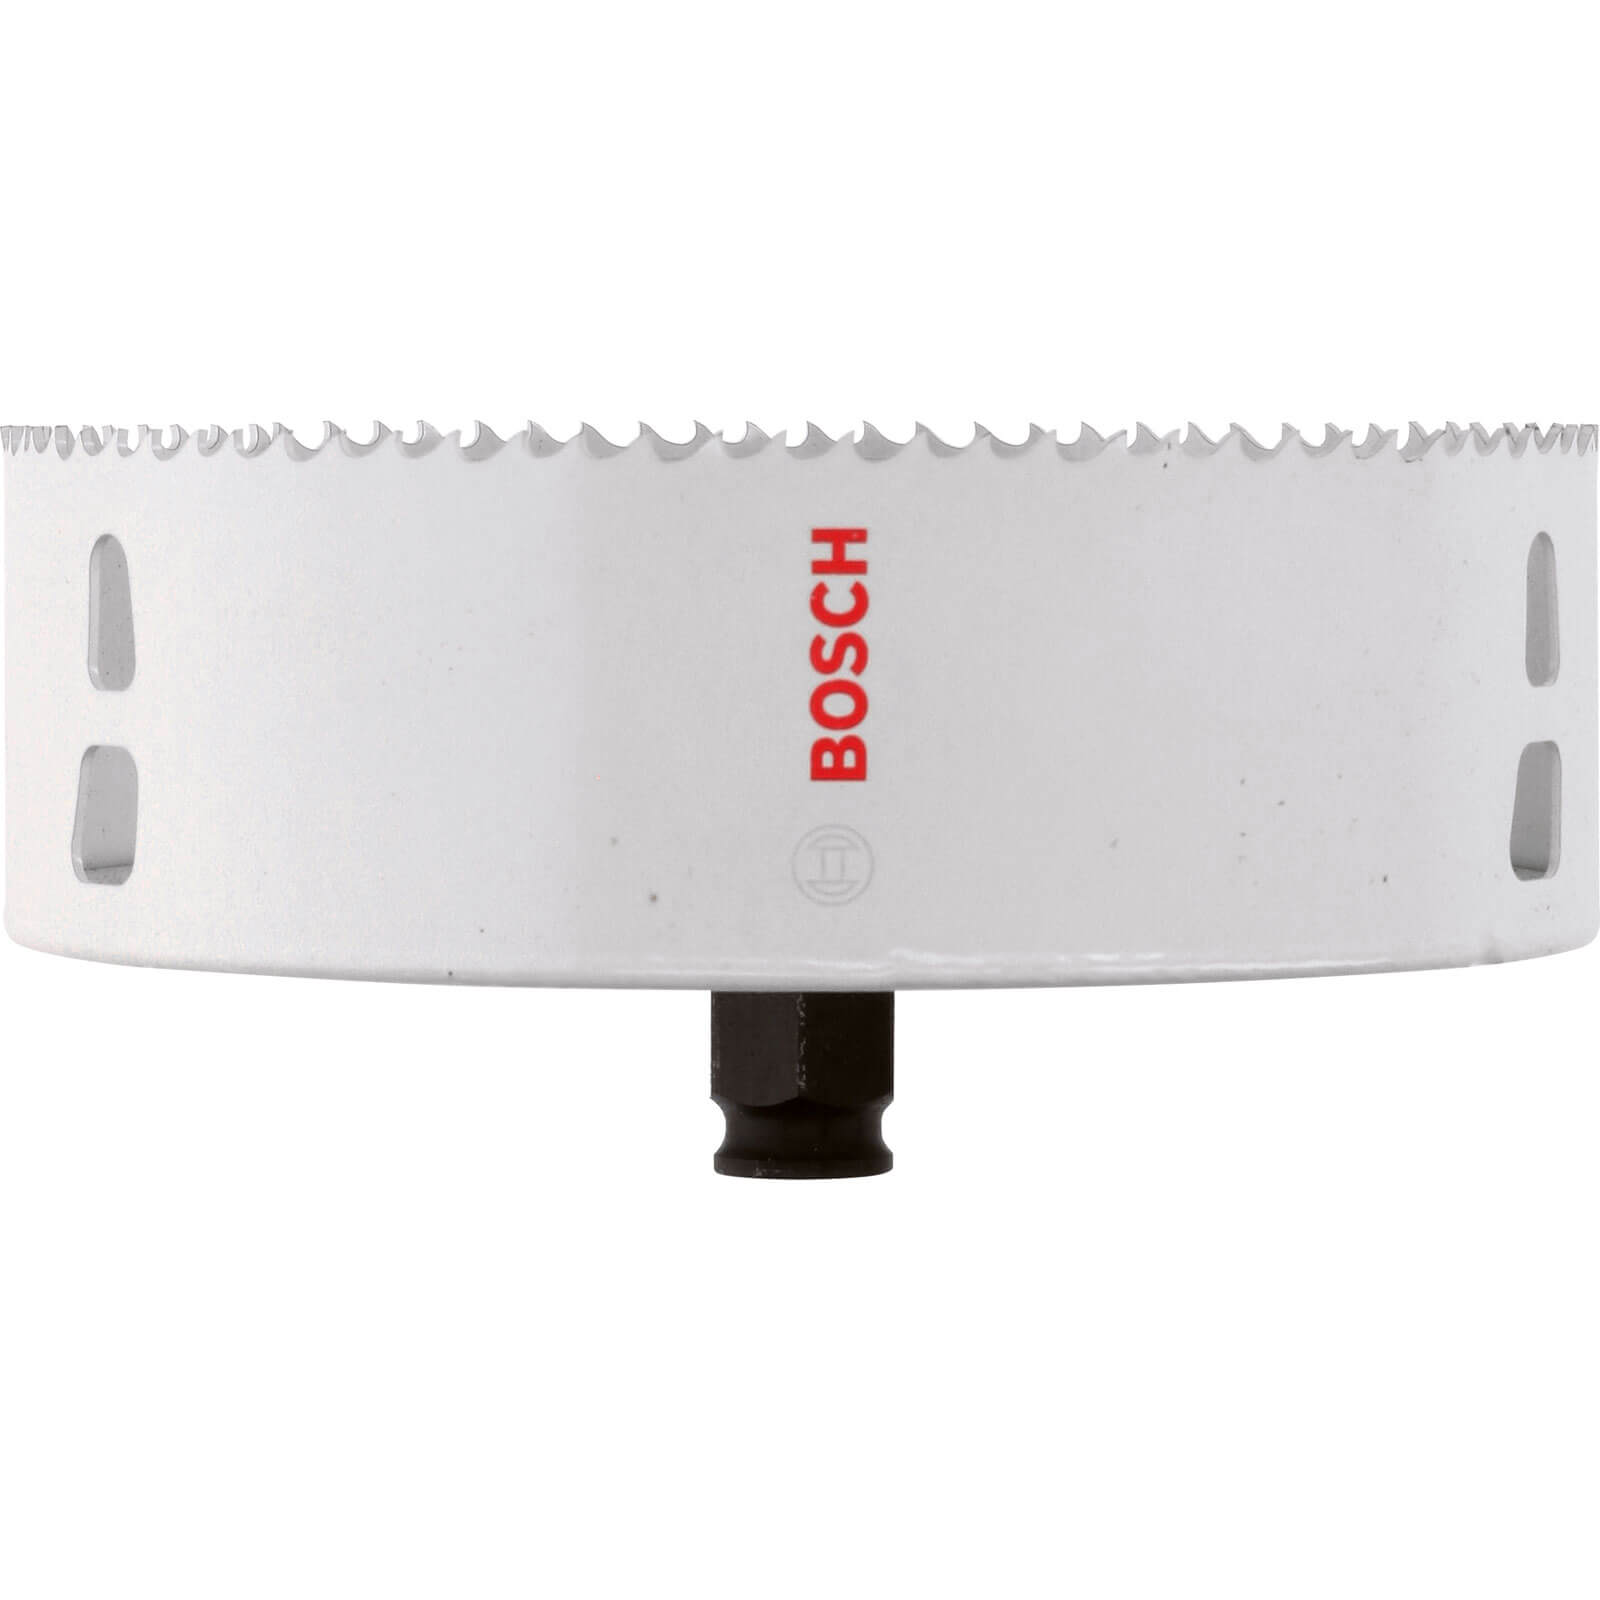 Image of Bosch Progressor Wood and Metal Hole Saw 177mm